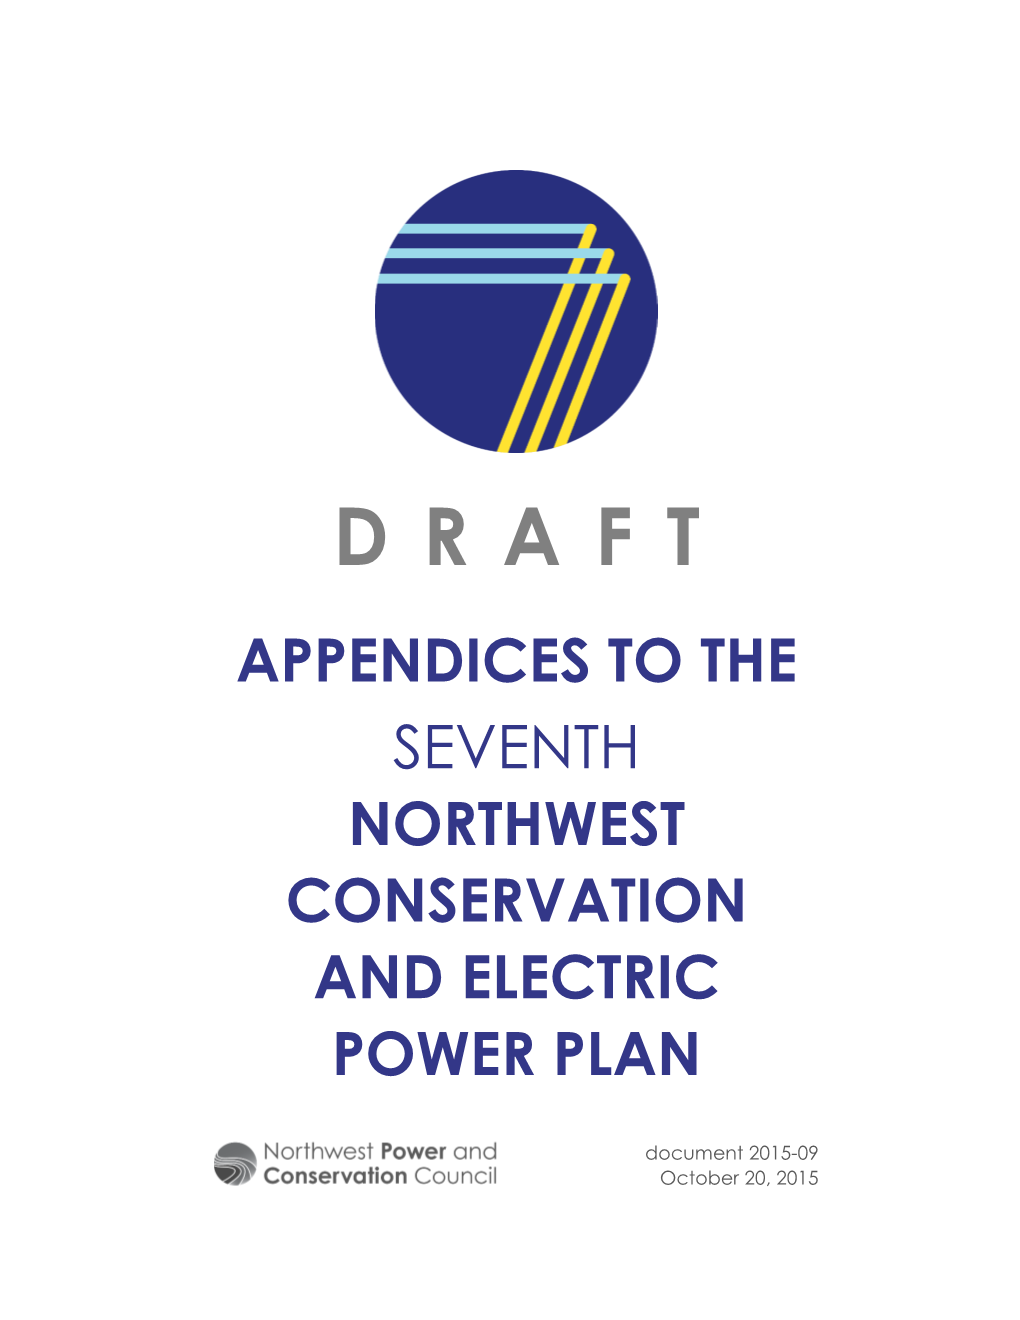 Appendices to the Seventh Northwest Conservation and Electric Power Plan